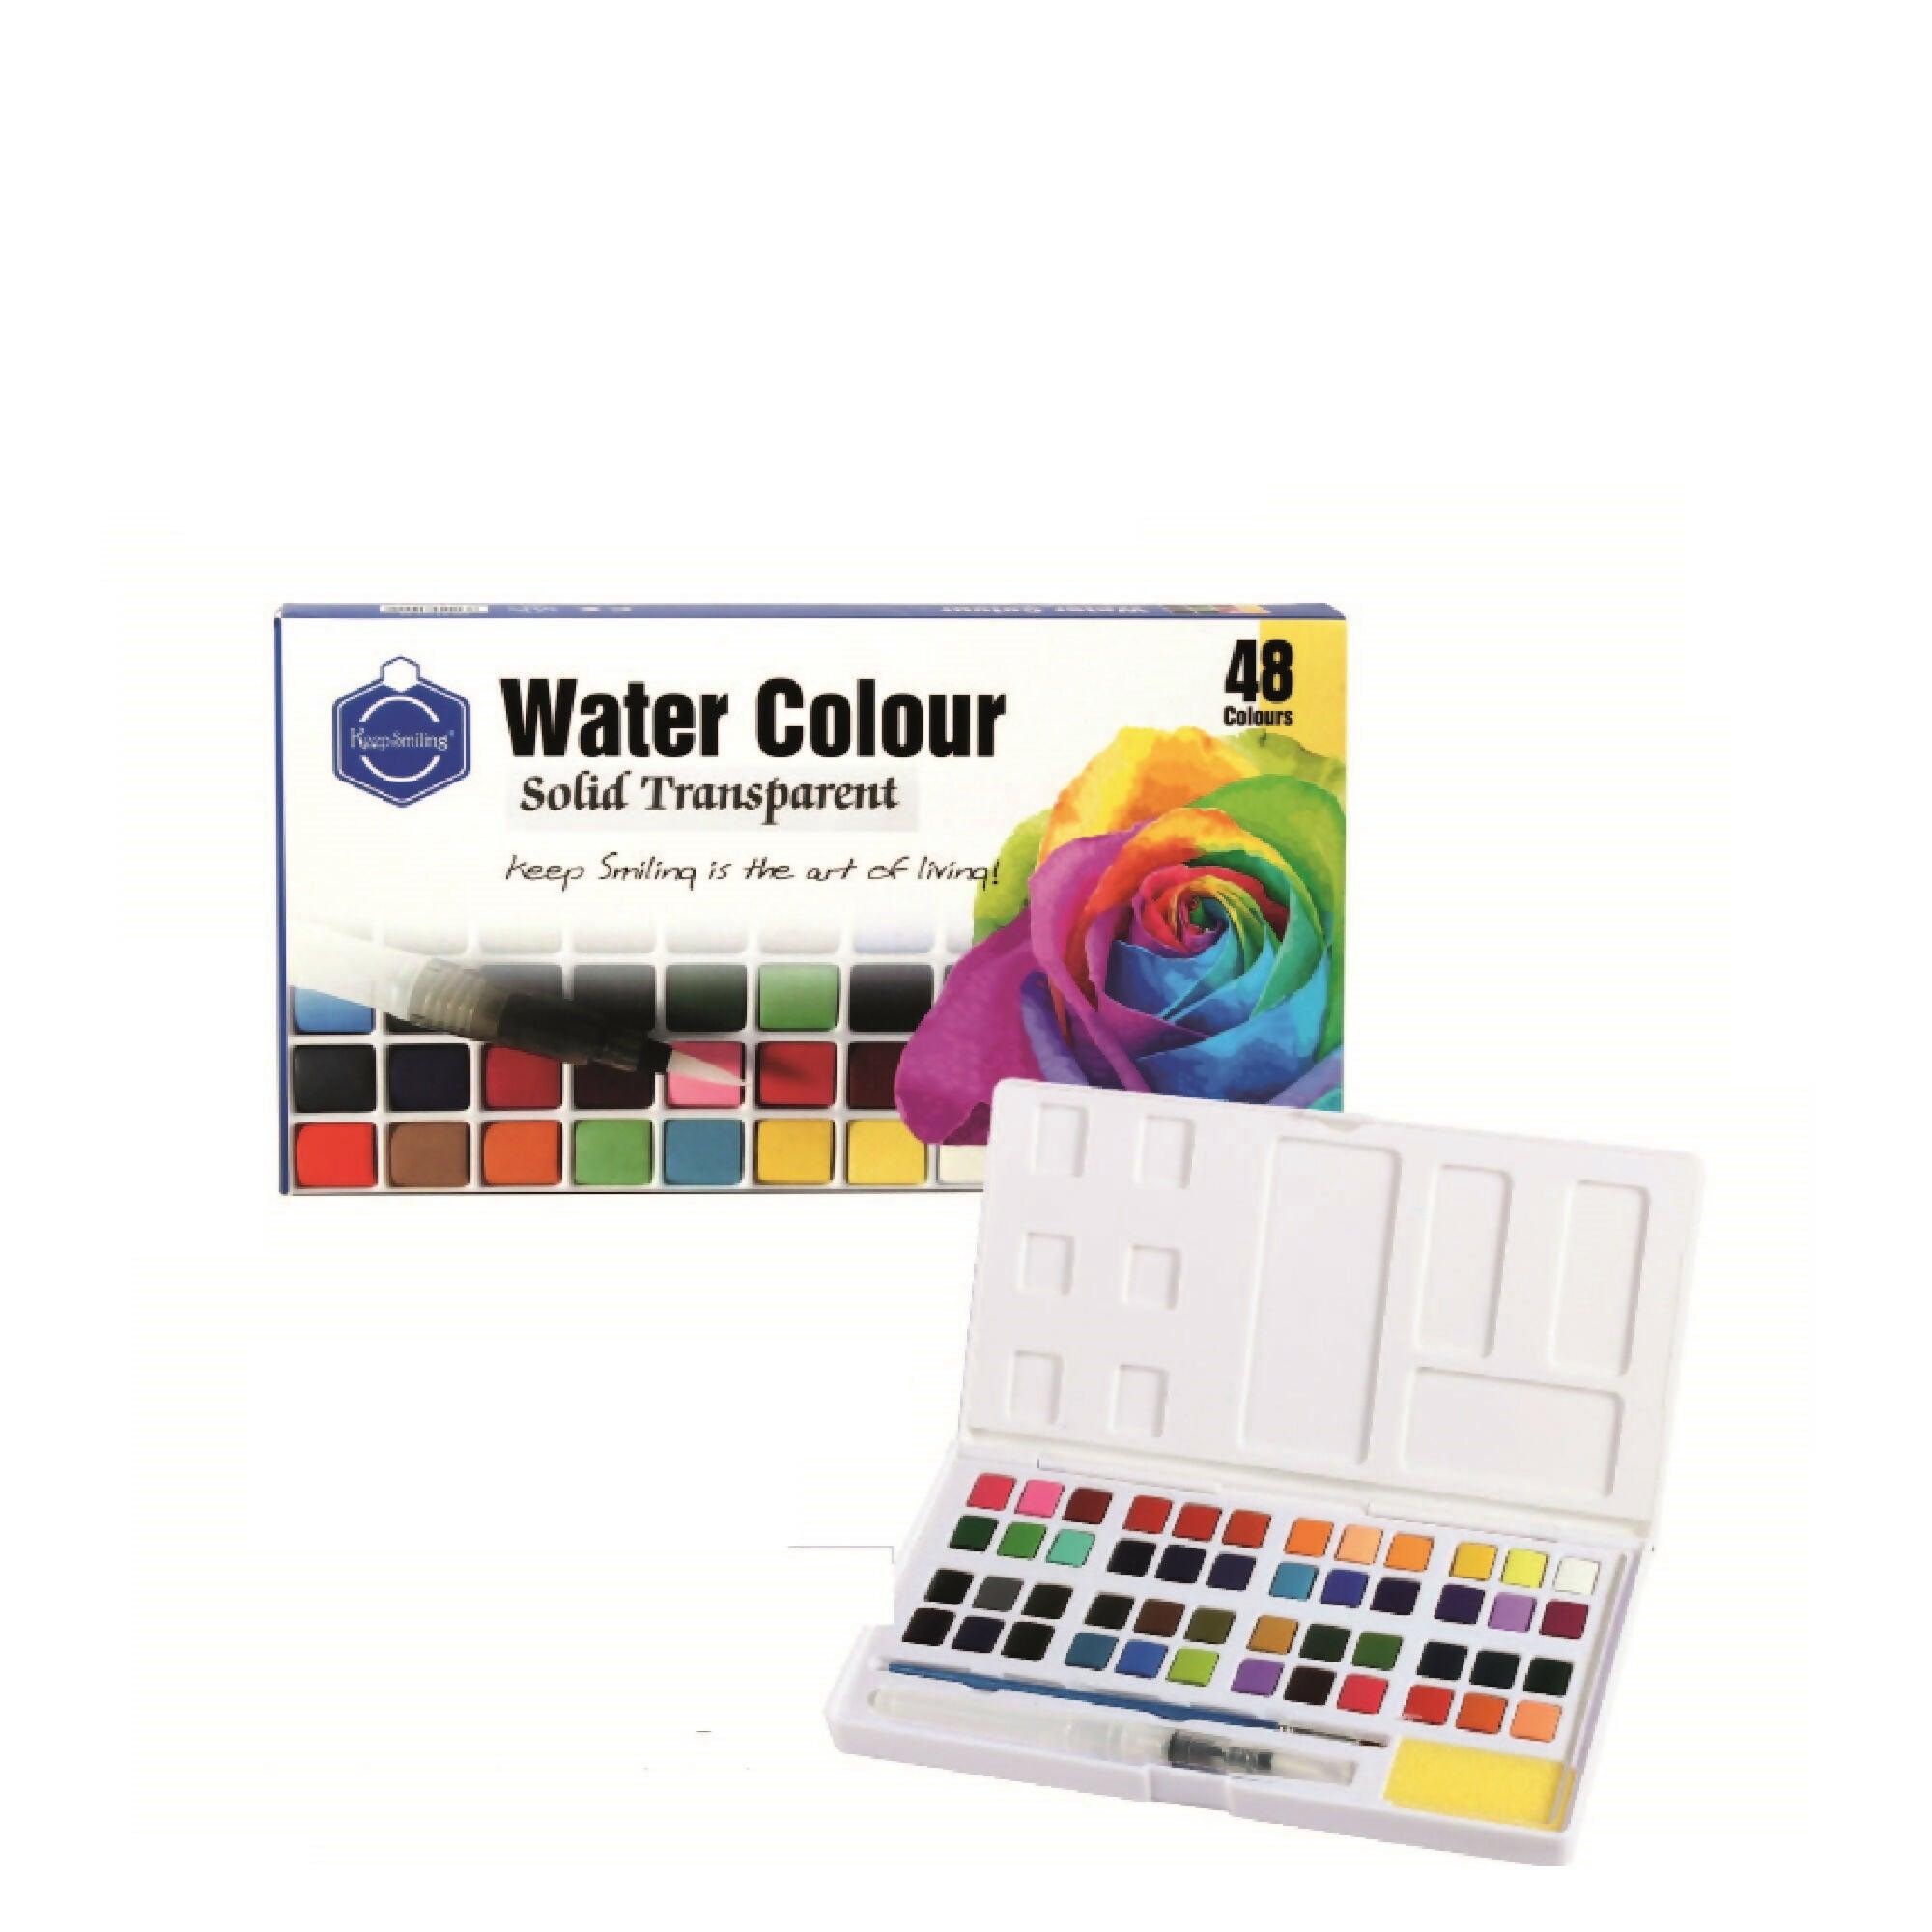 Keep Smiling Aquarelle Solid Transparent Watercolor Paints with Water Brush, Palette and Sponge - ValueBox